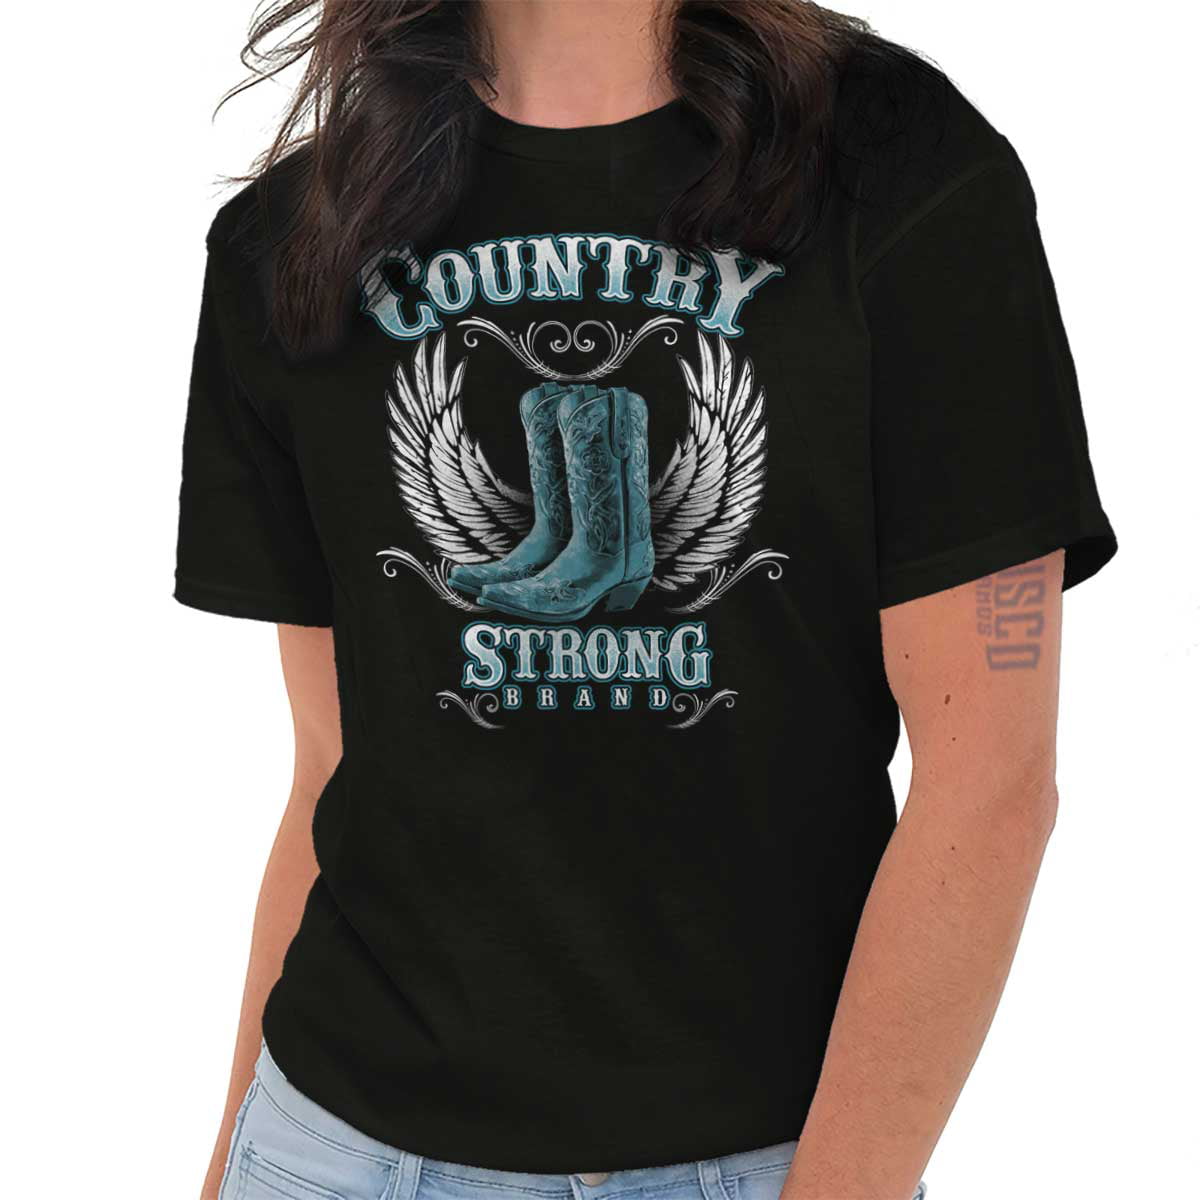 Country Strong Boots Wings Cowgirl Southern T Shirt Tee - Walmart.com